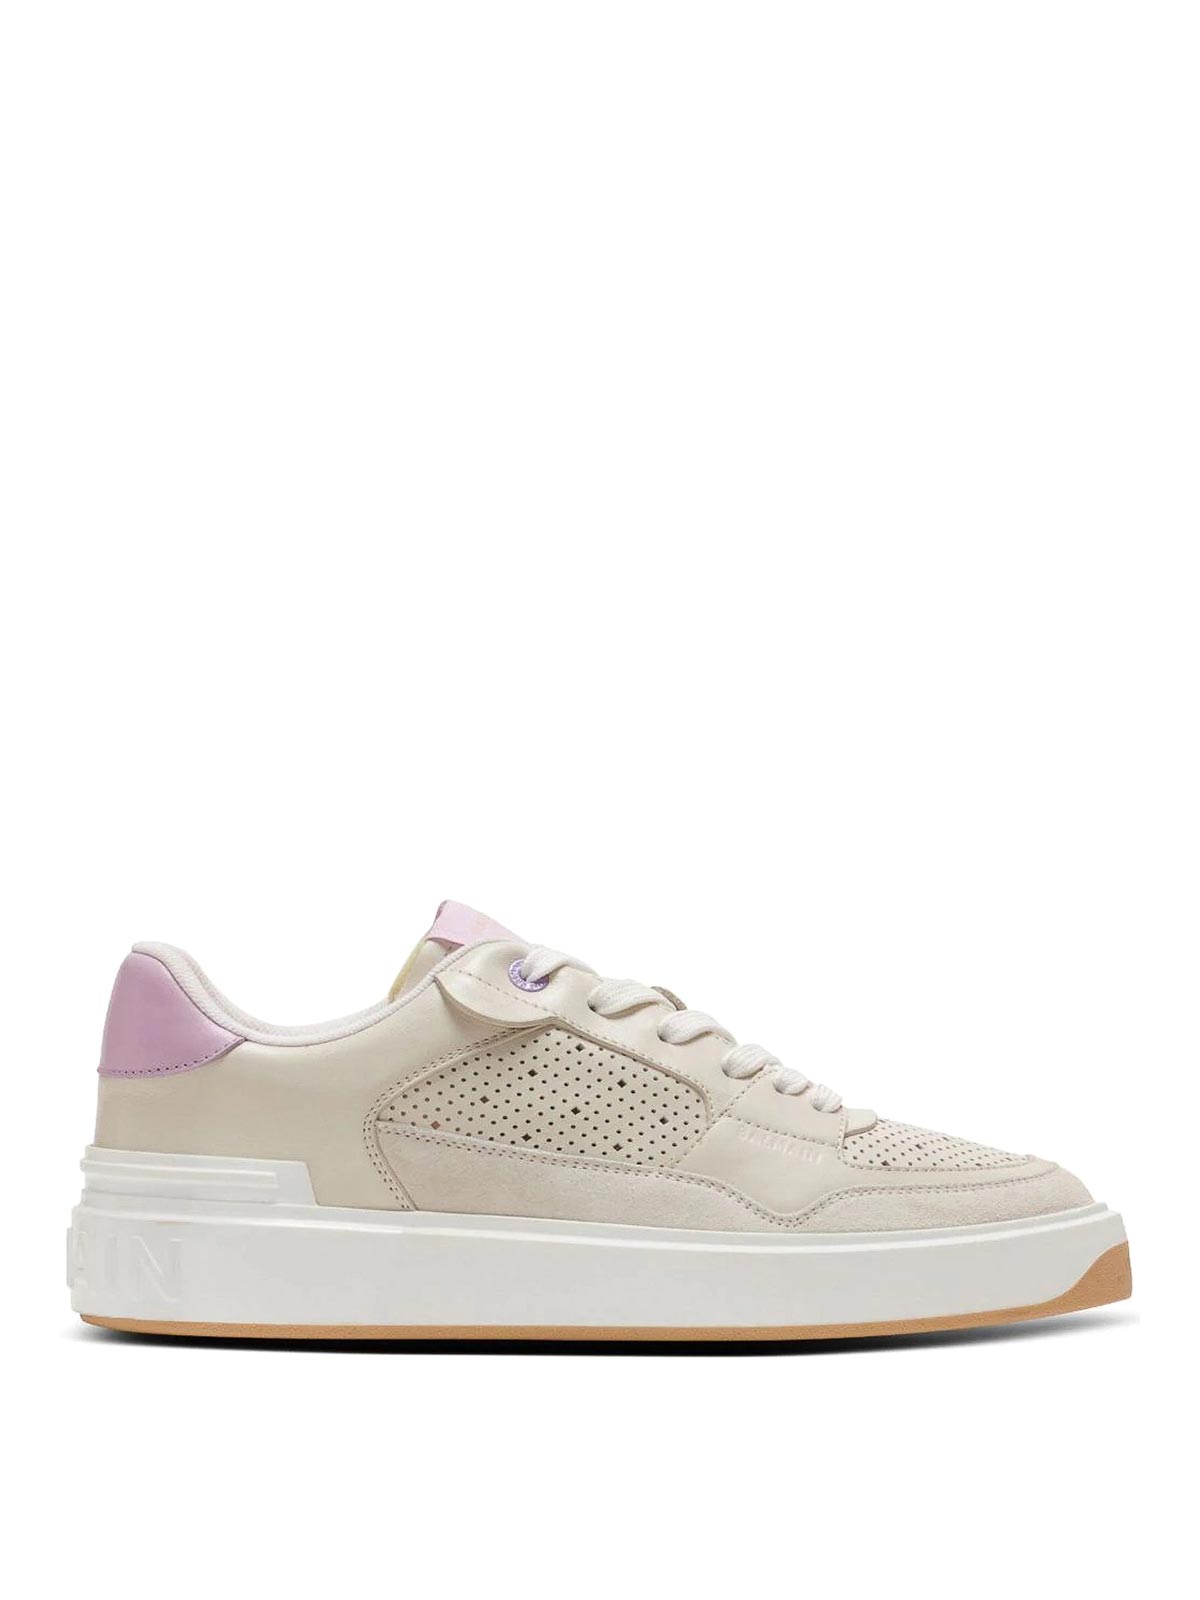 Balmain B-cout Flip Leather Trainers In Beige